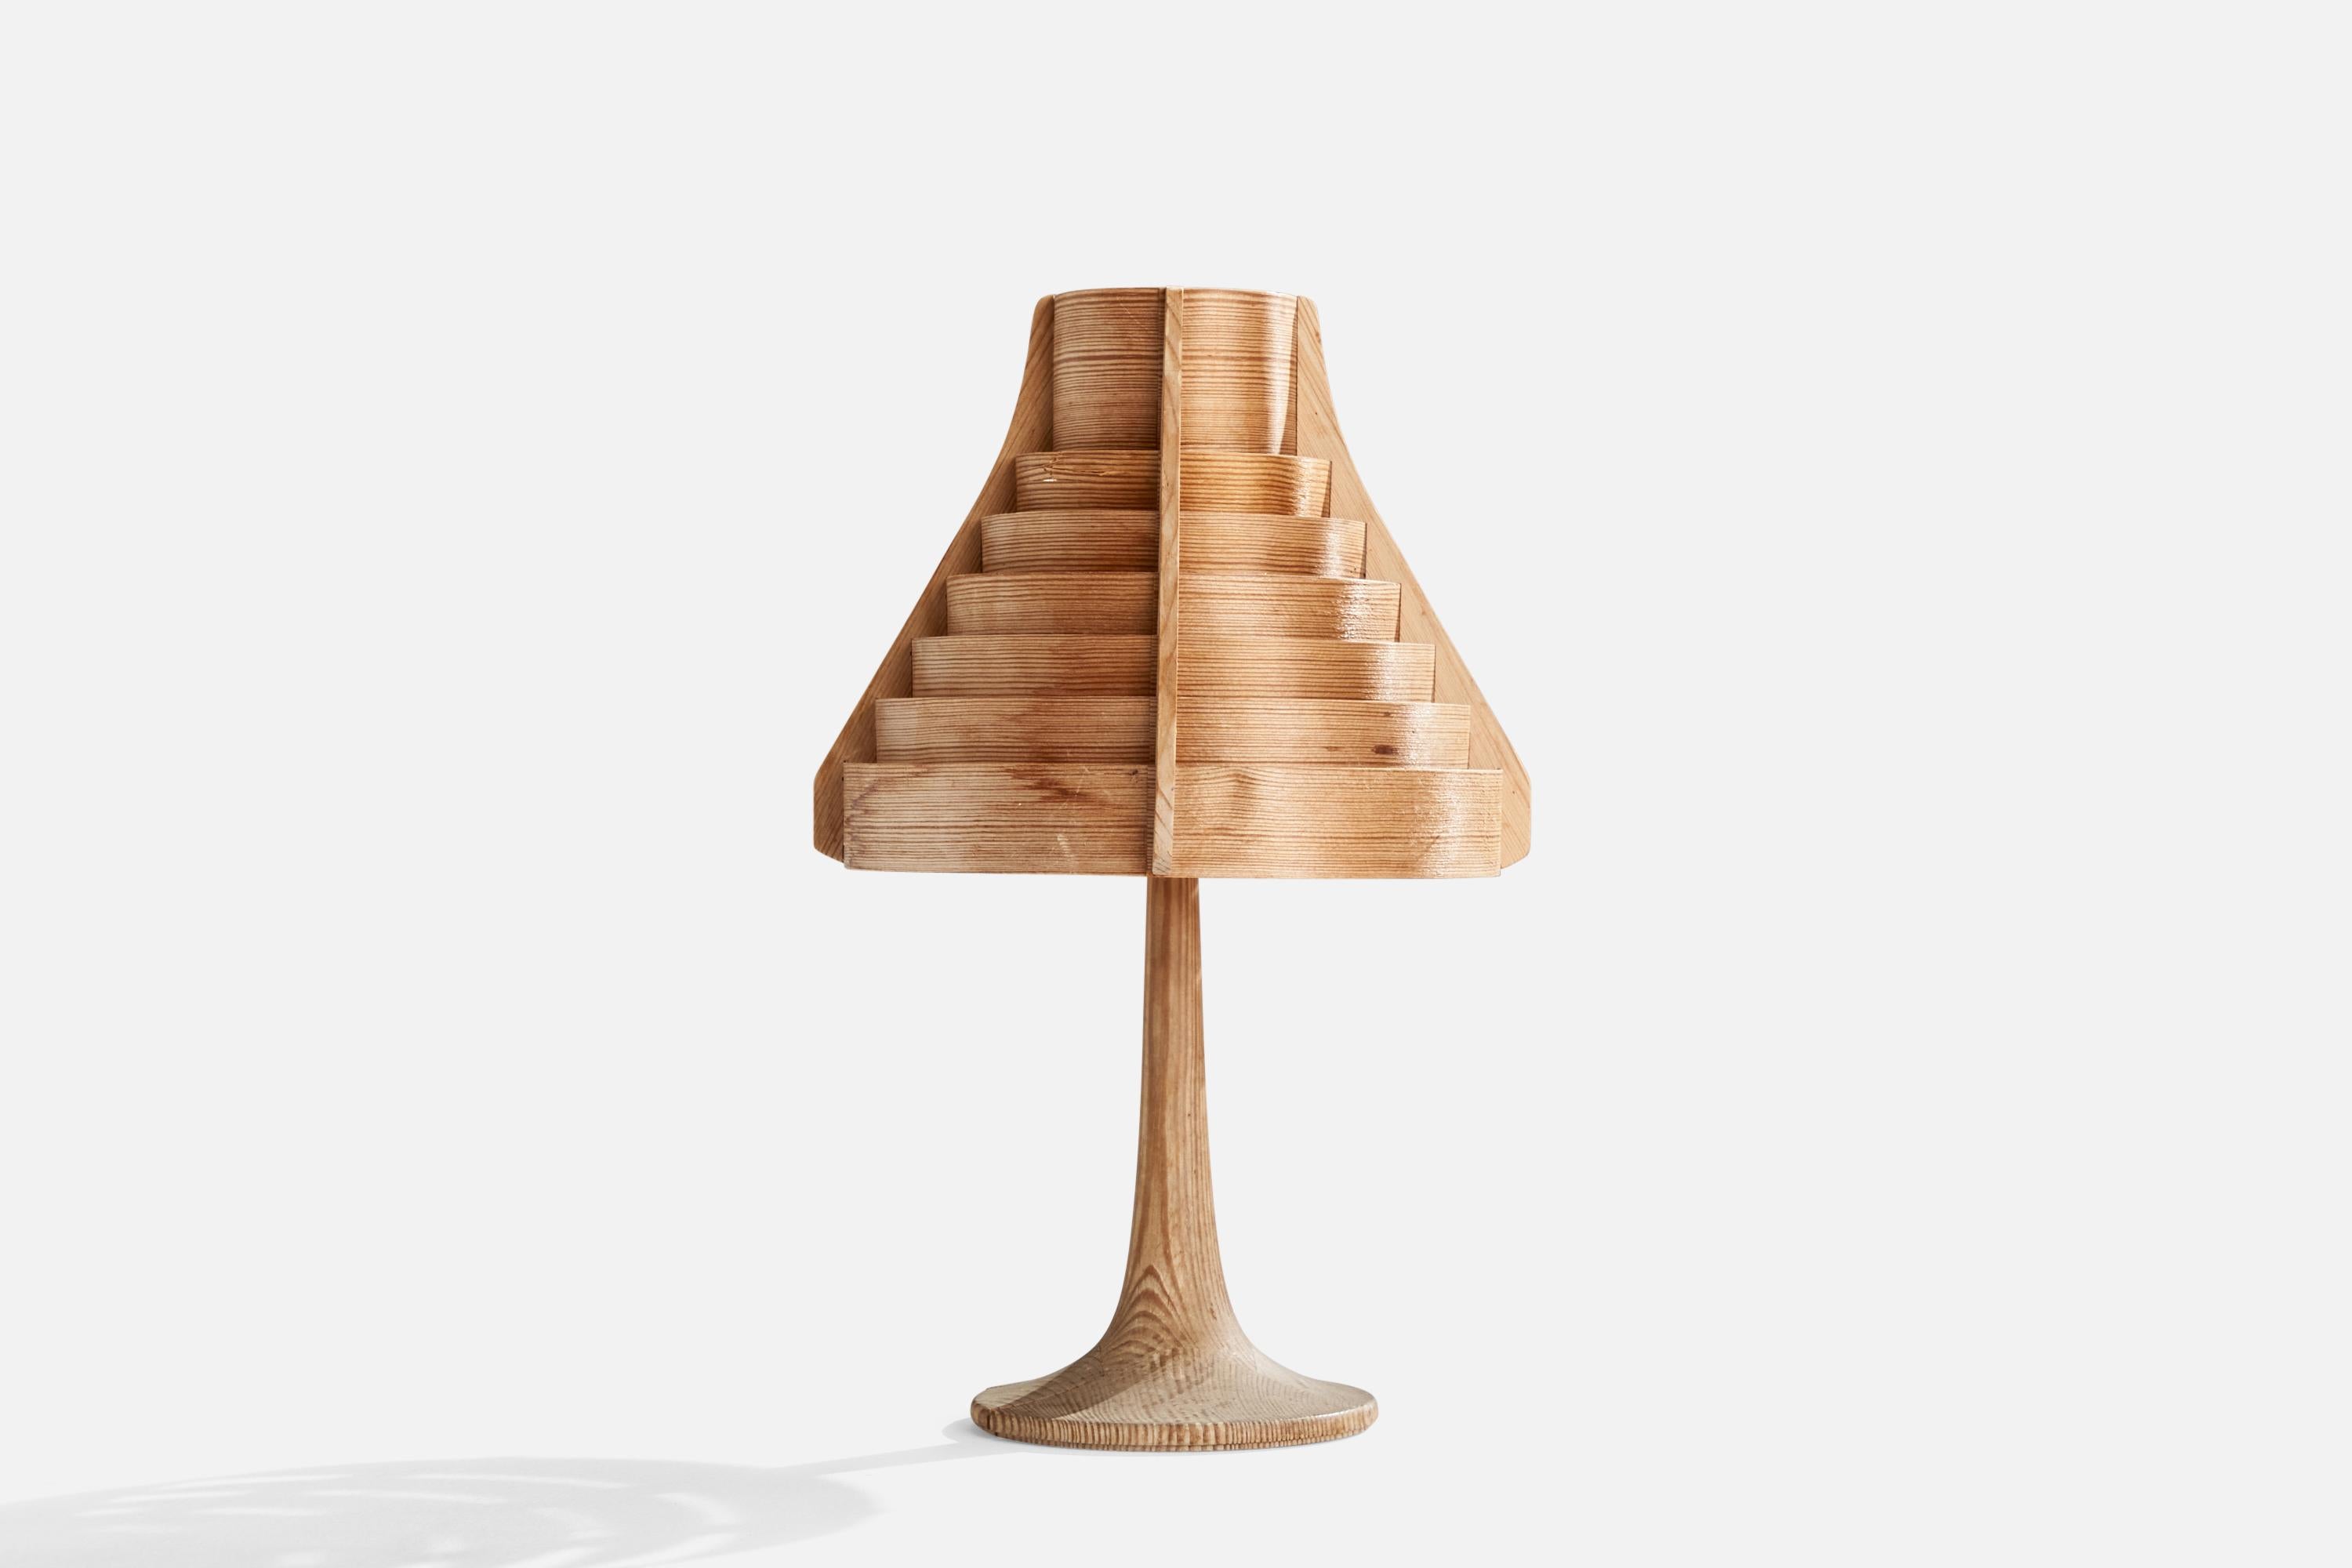 A pine and moulded pine veneer table lamp designed by Hans-Agne Jakobsson and produced by Elysett, Sweden, c. 1970s.

Overall Dimensions (inches): 15.50” H x 8.5” W x 8.25” D
Stated dimensions include shade.
Bulb Specifications: E-26 Bulb
Number of